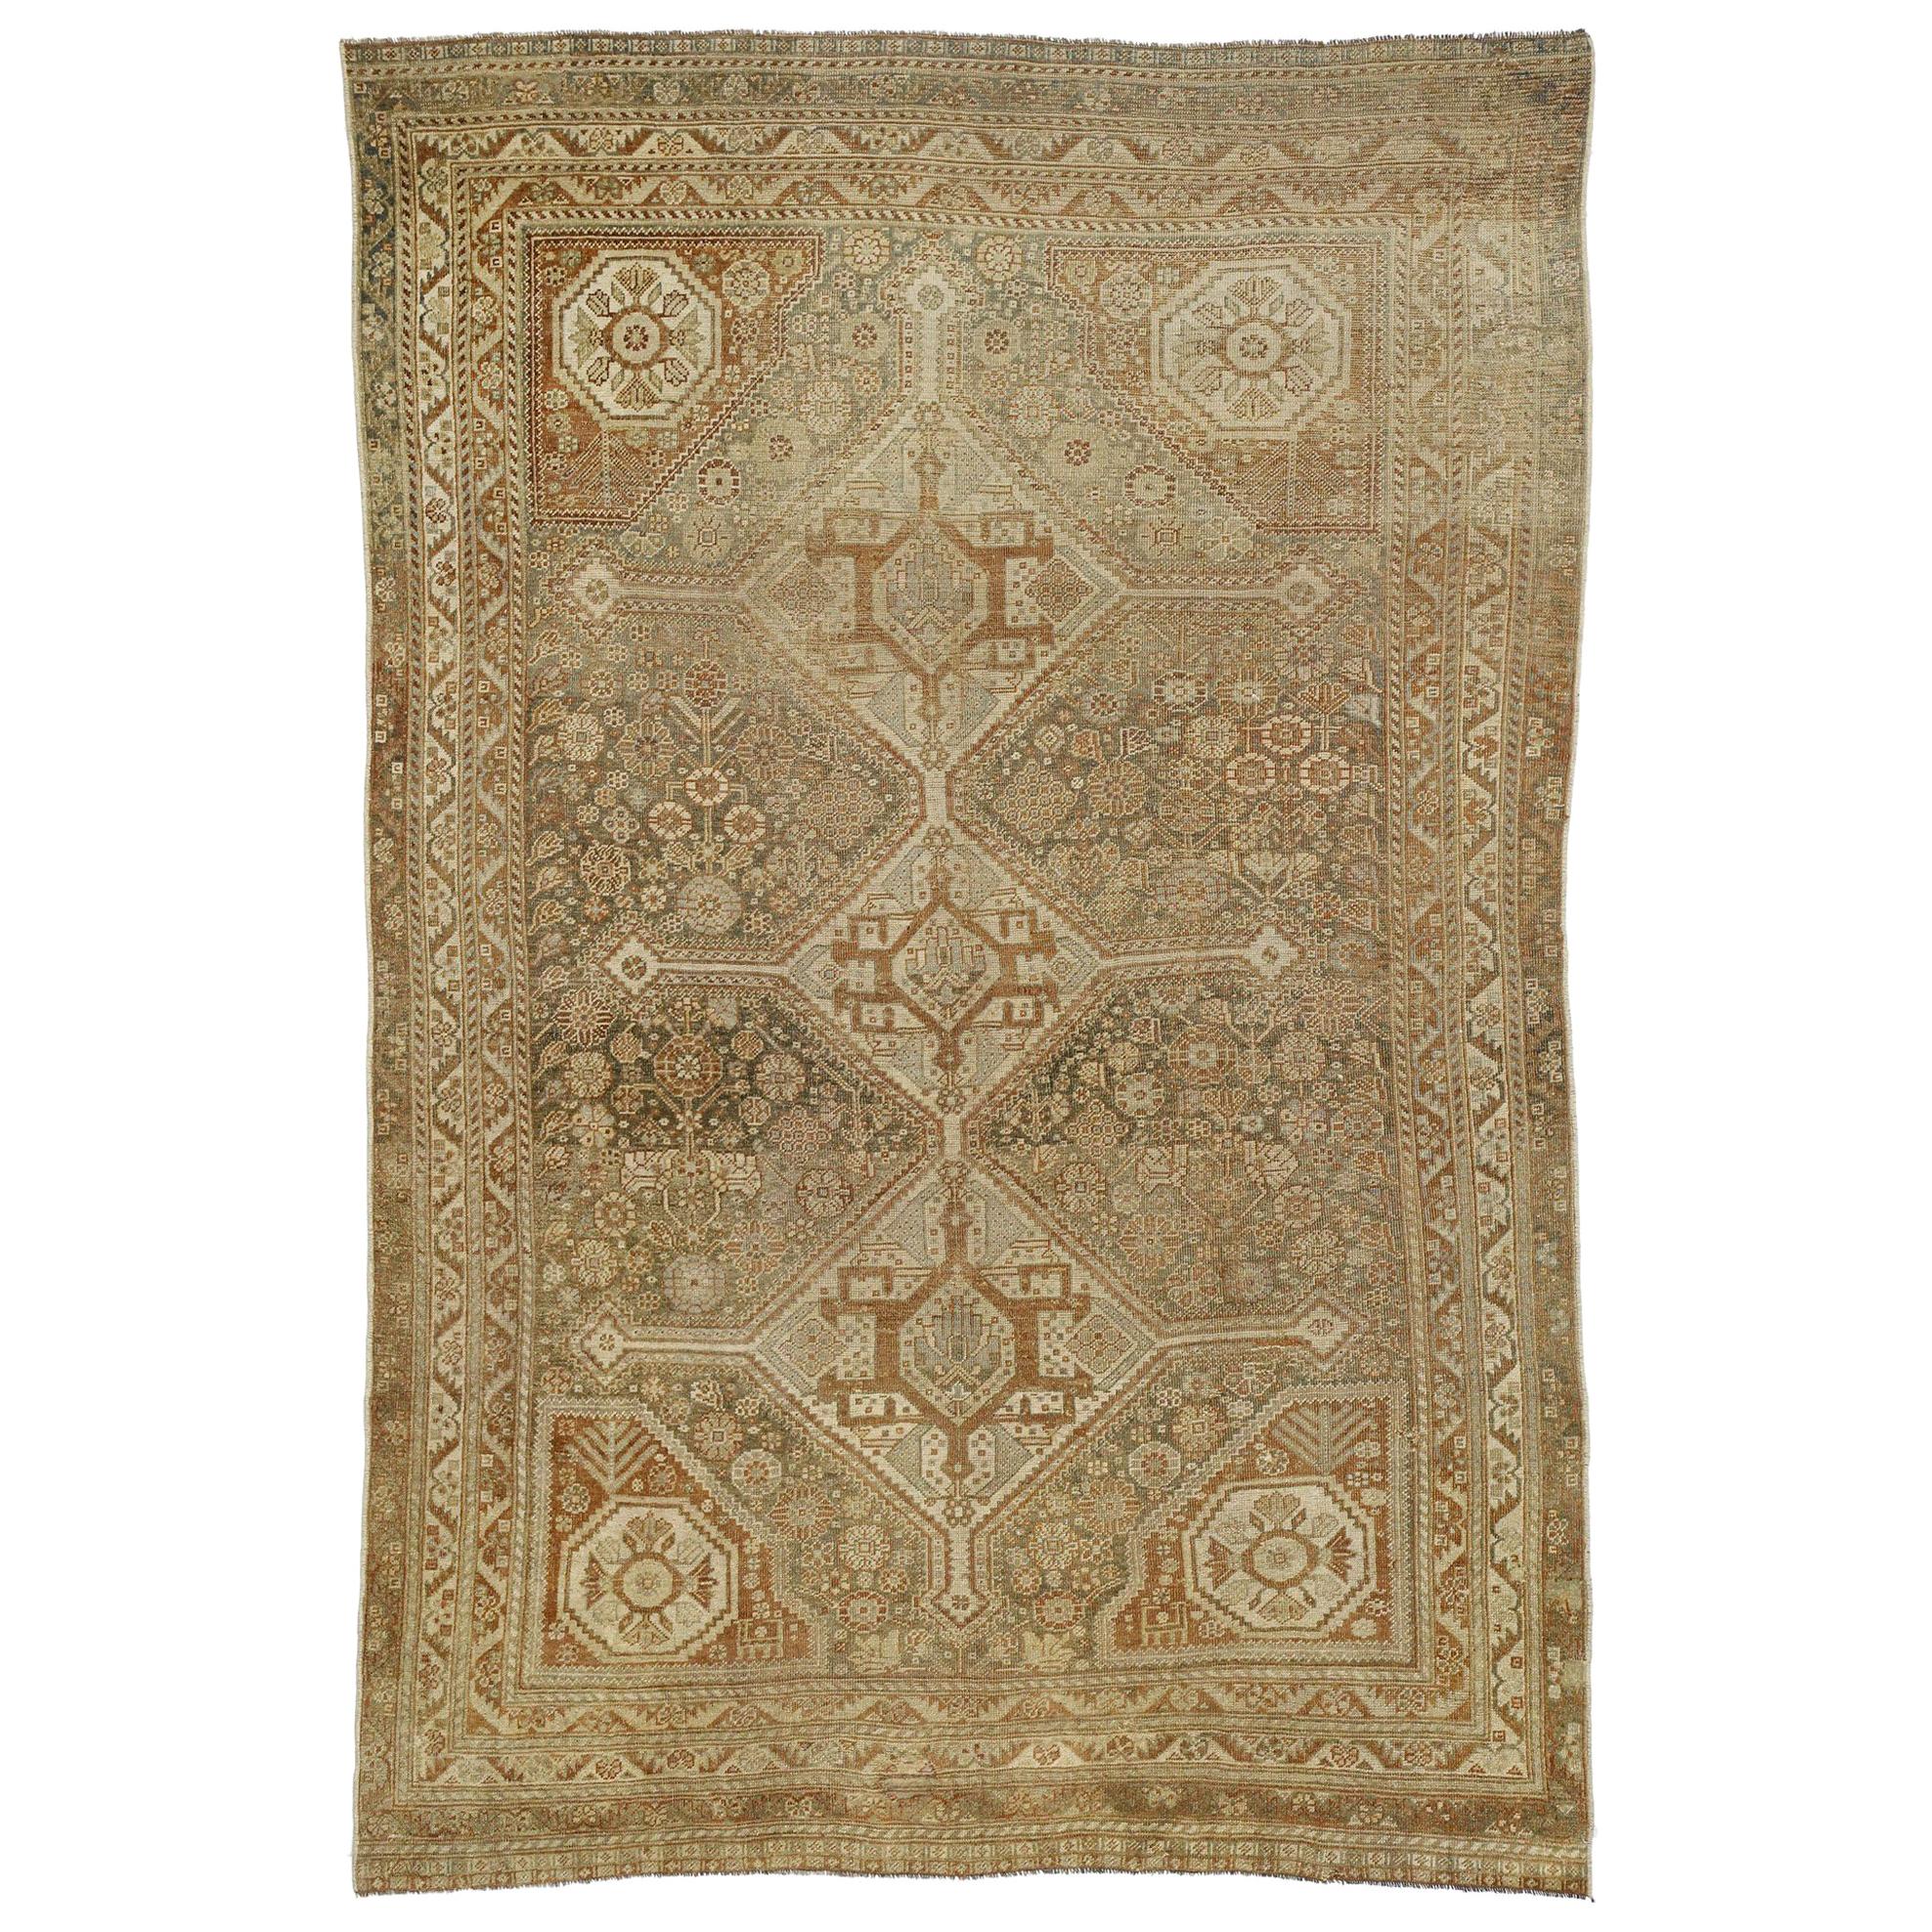 Distressed Antique Persian Shiraz Rug with American Craftsman Rustic Style For Sale